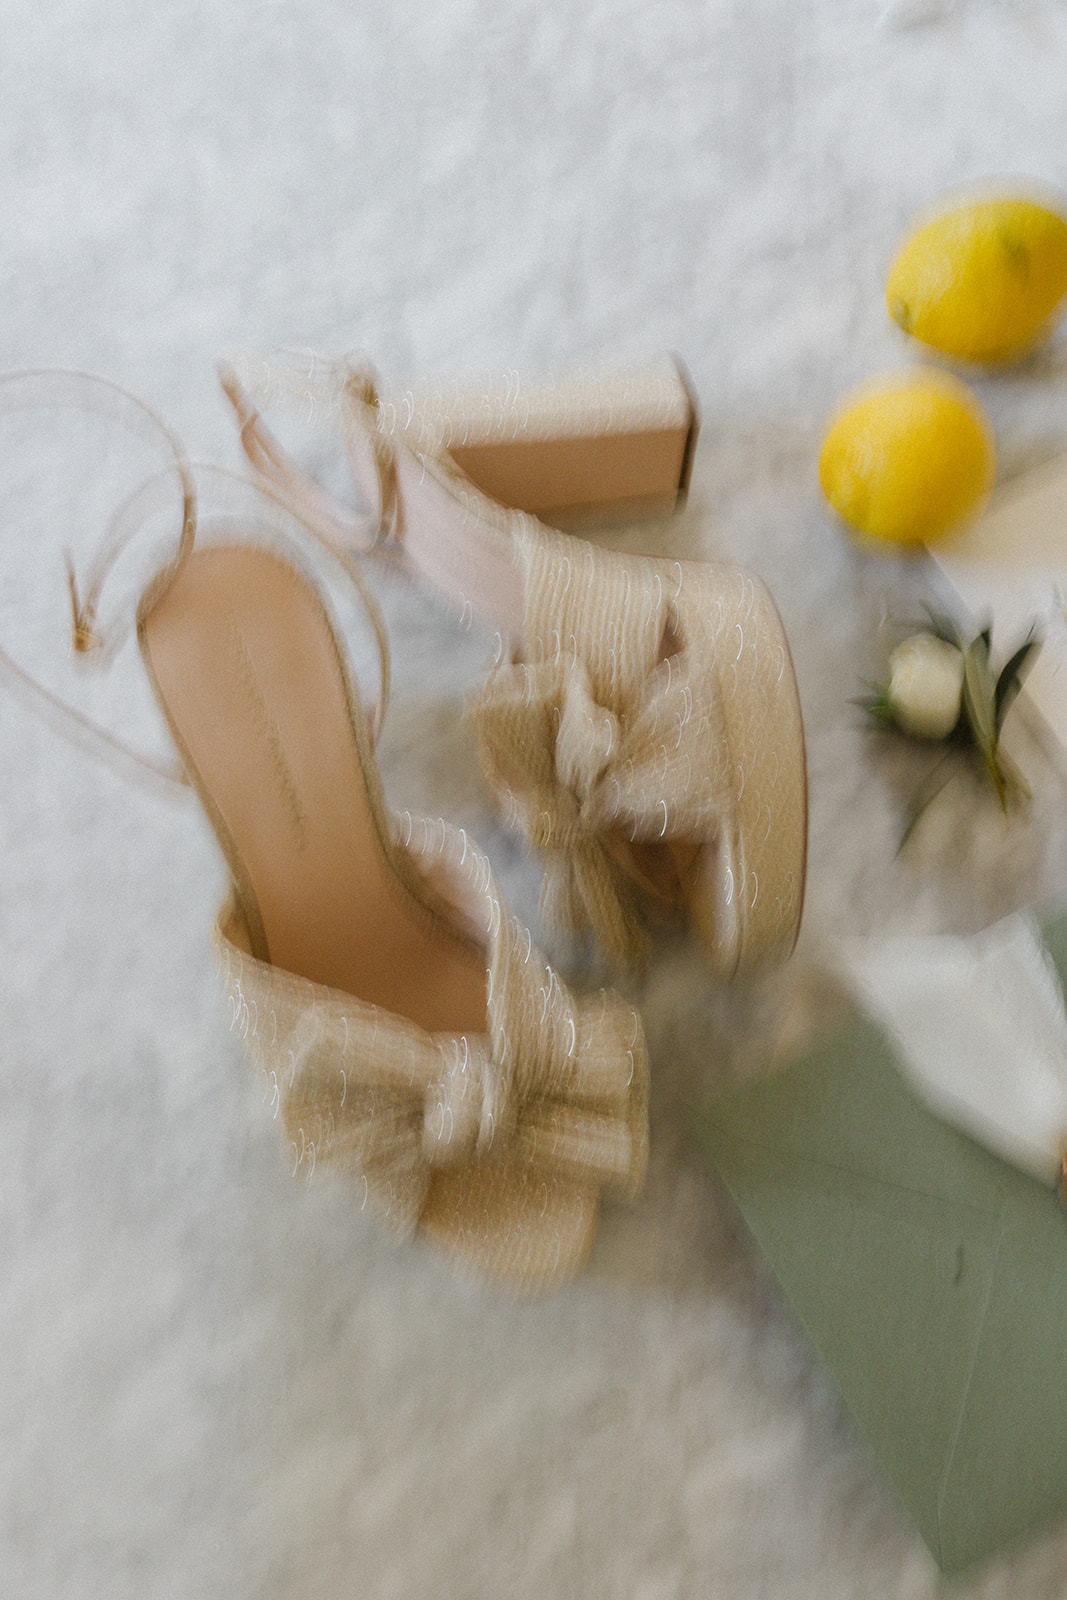 Elegant-Bridal-Shoes-with-Citrus-and-Olives-on-Marble-Table